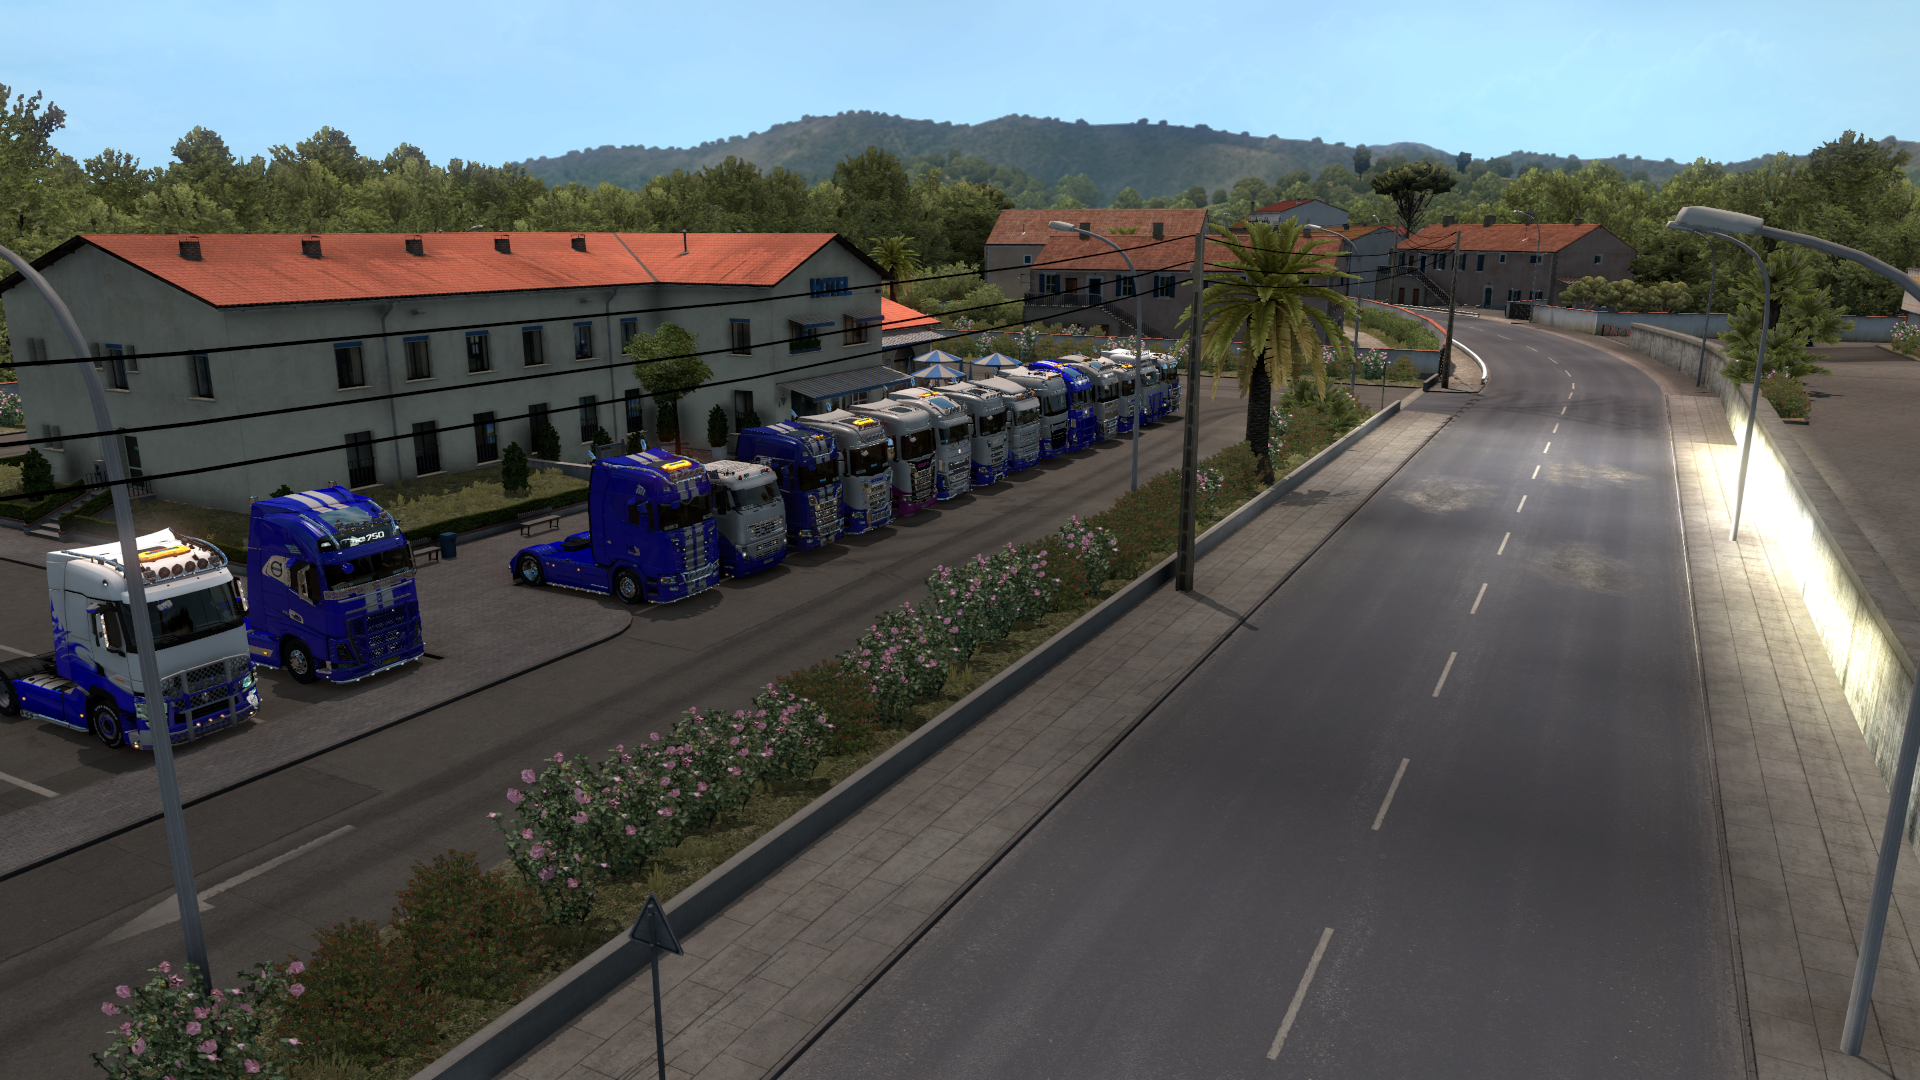 ets2_20210402_235925_00.png